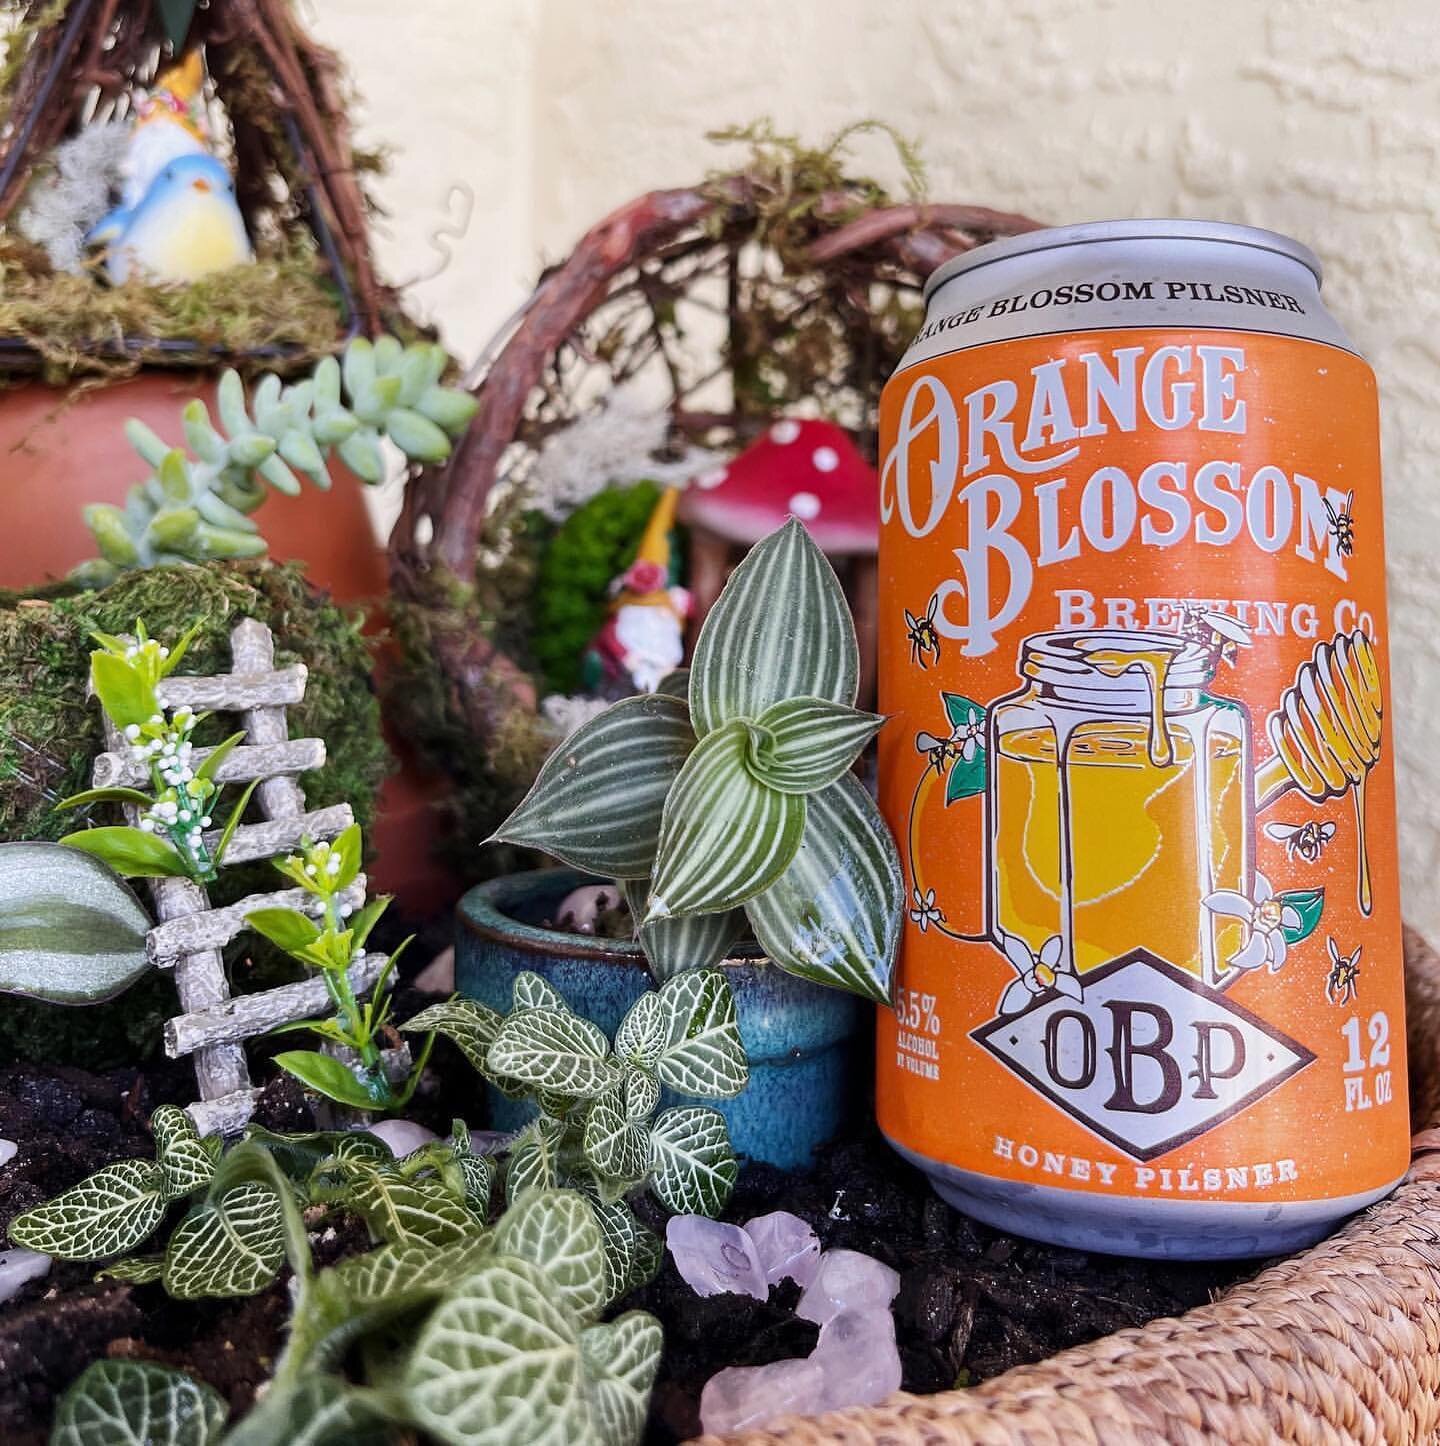 Spring and OBP go hand in hand. 😁🍻❤️
.
.
repost @_saisanna Orange Blossom Pilsner 🍊🐝🍯 always look forward to this honey beer. Enjoyed right out of the can 🧚🏽&zwj;♂️🪴 sips are crisp and sweetness is light #pilsner #honeybeer #orangeblossom #fl